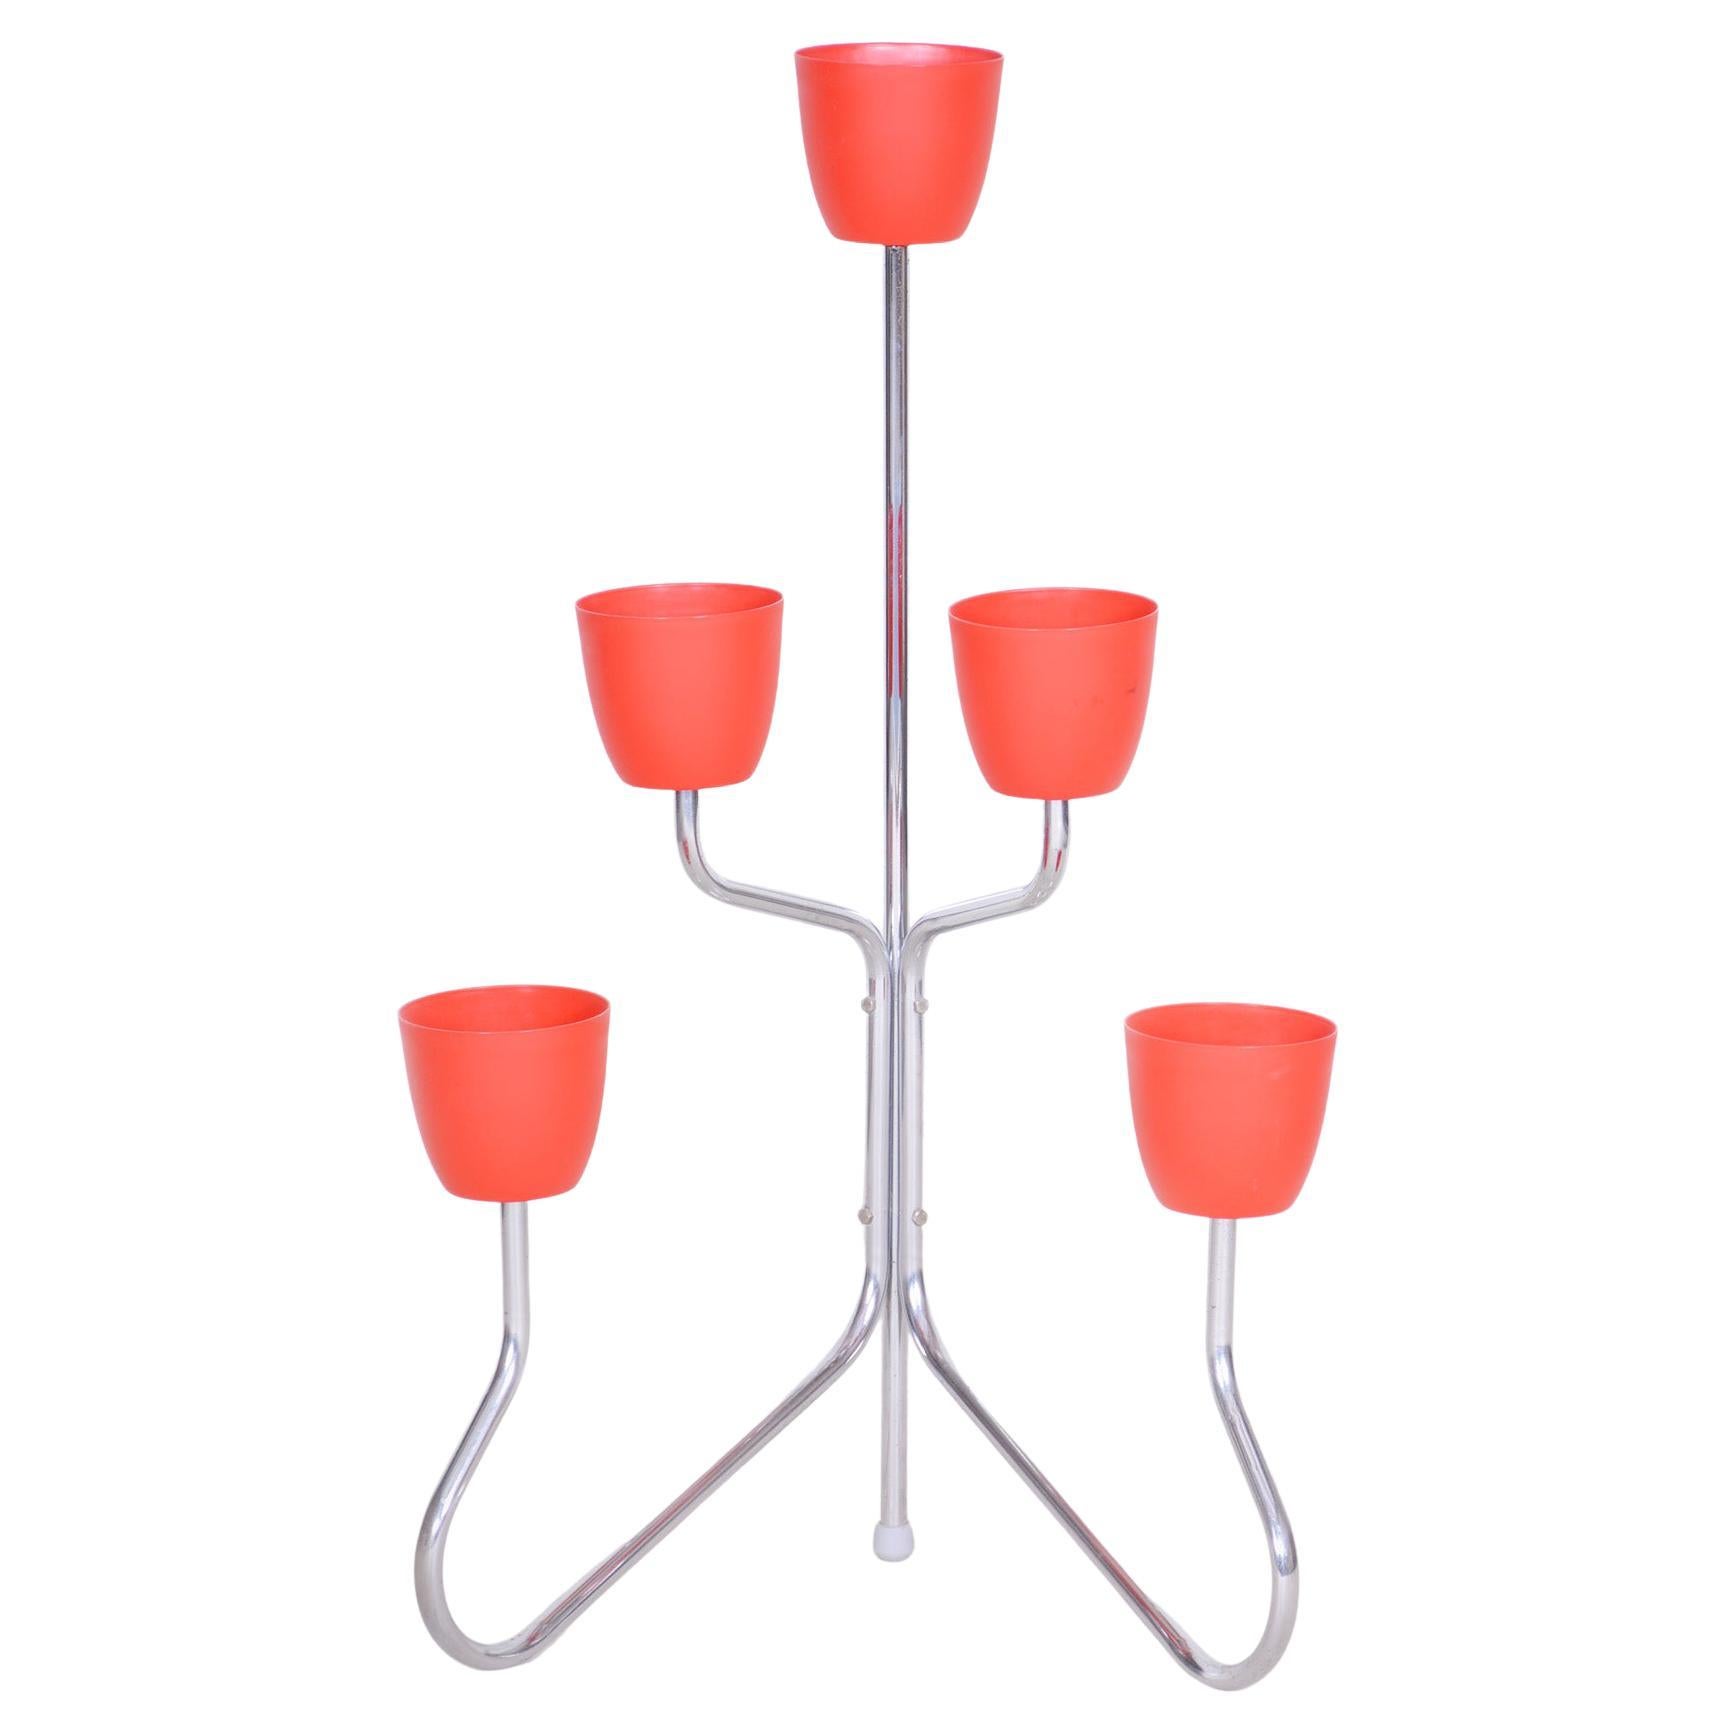 Czech Bauhaus Chrome Flower Stand Made Out of Chrome Plated Steel, 1950s